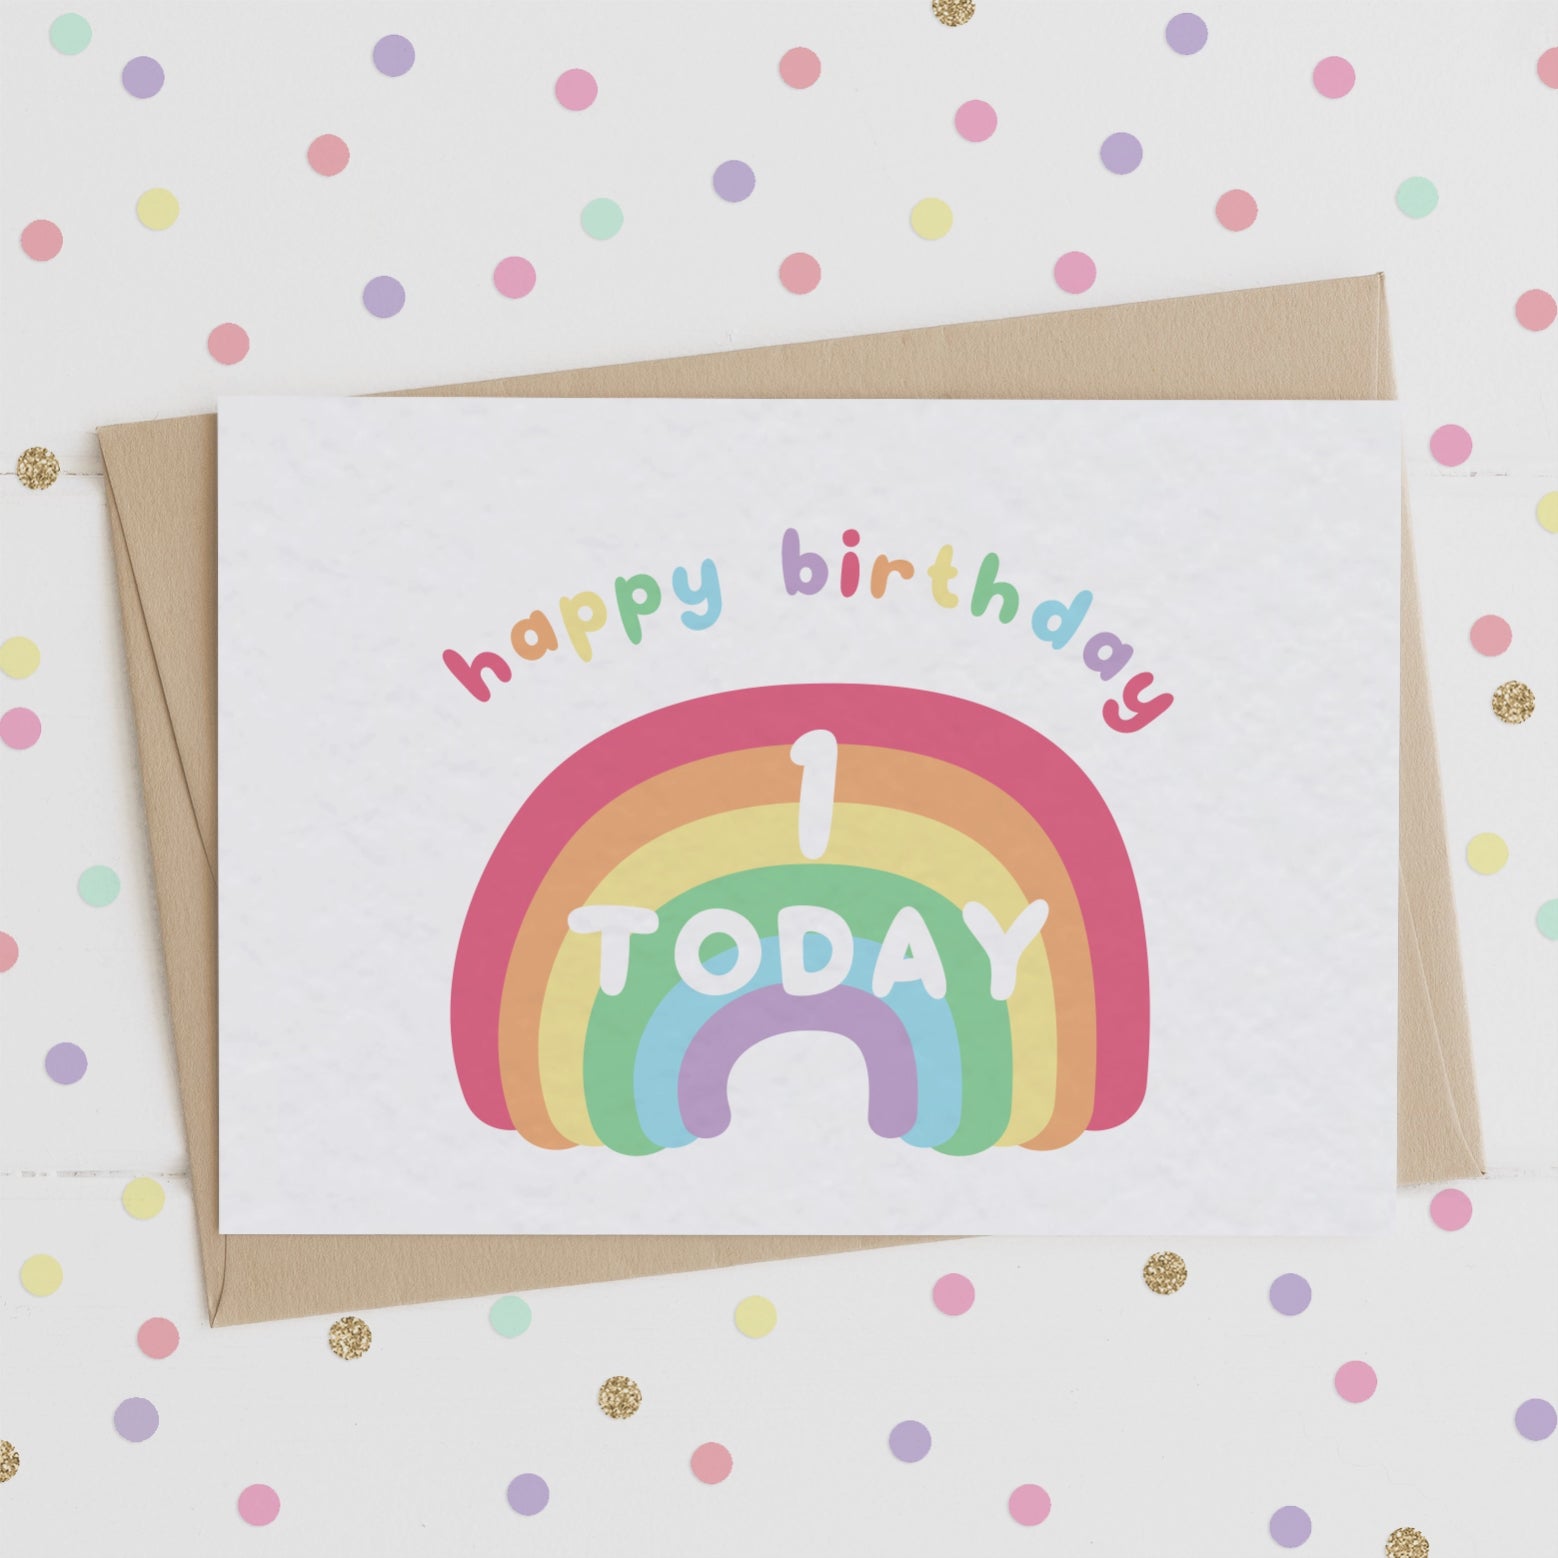 A showcase video of cute birthday cards with smiling happy rainbows on and the message "HAPPY BIRTHDAY" and the milestone age between 1-10.